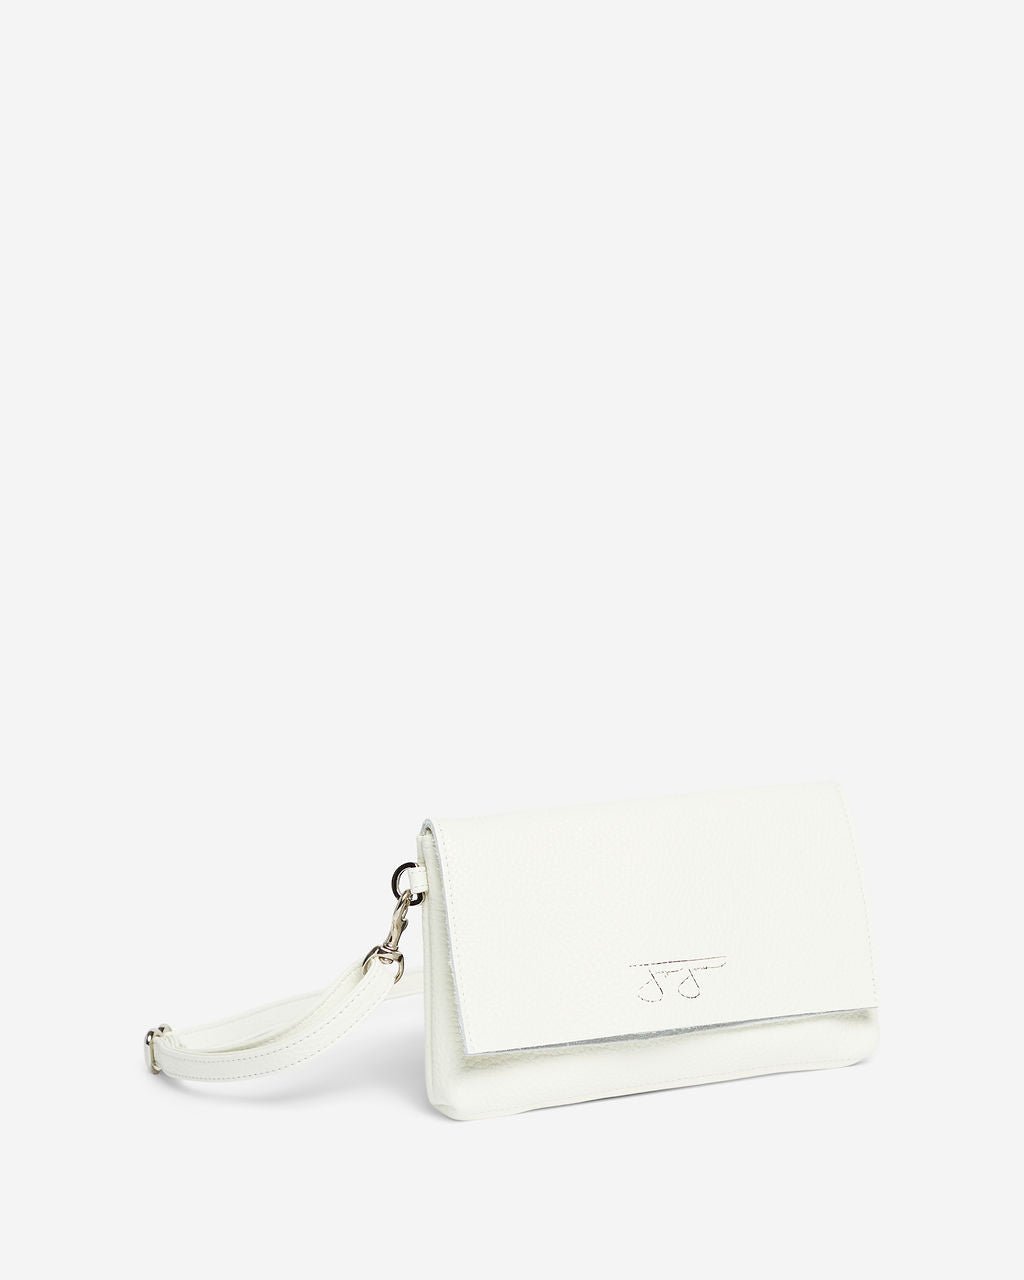 Norma Hipster Bag - Cream  Joey James, The Label   